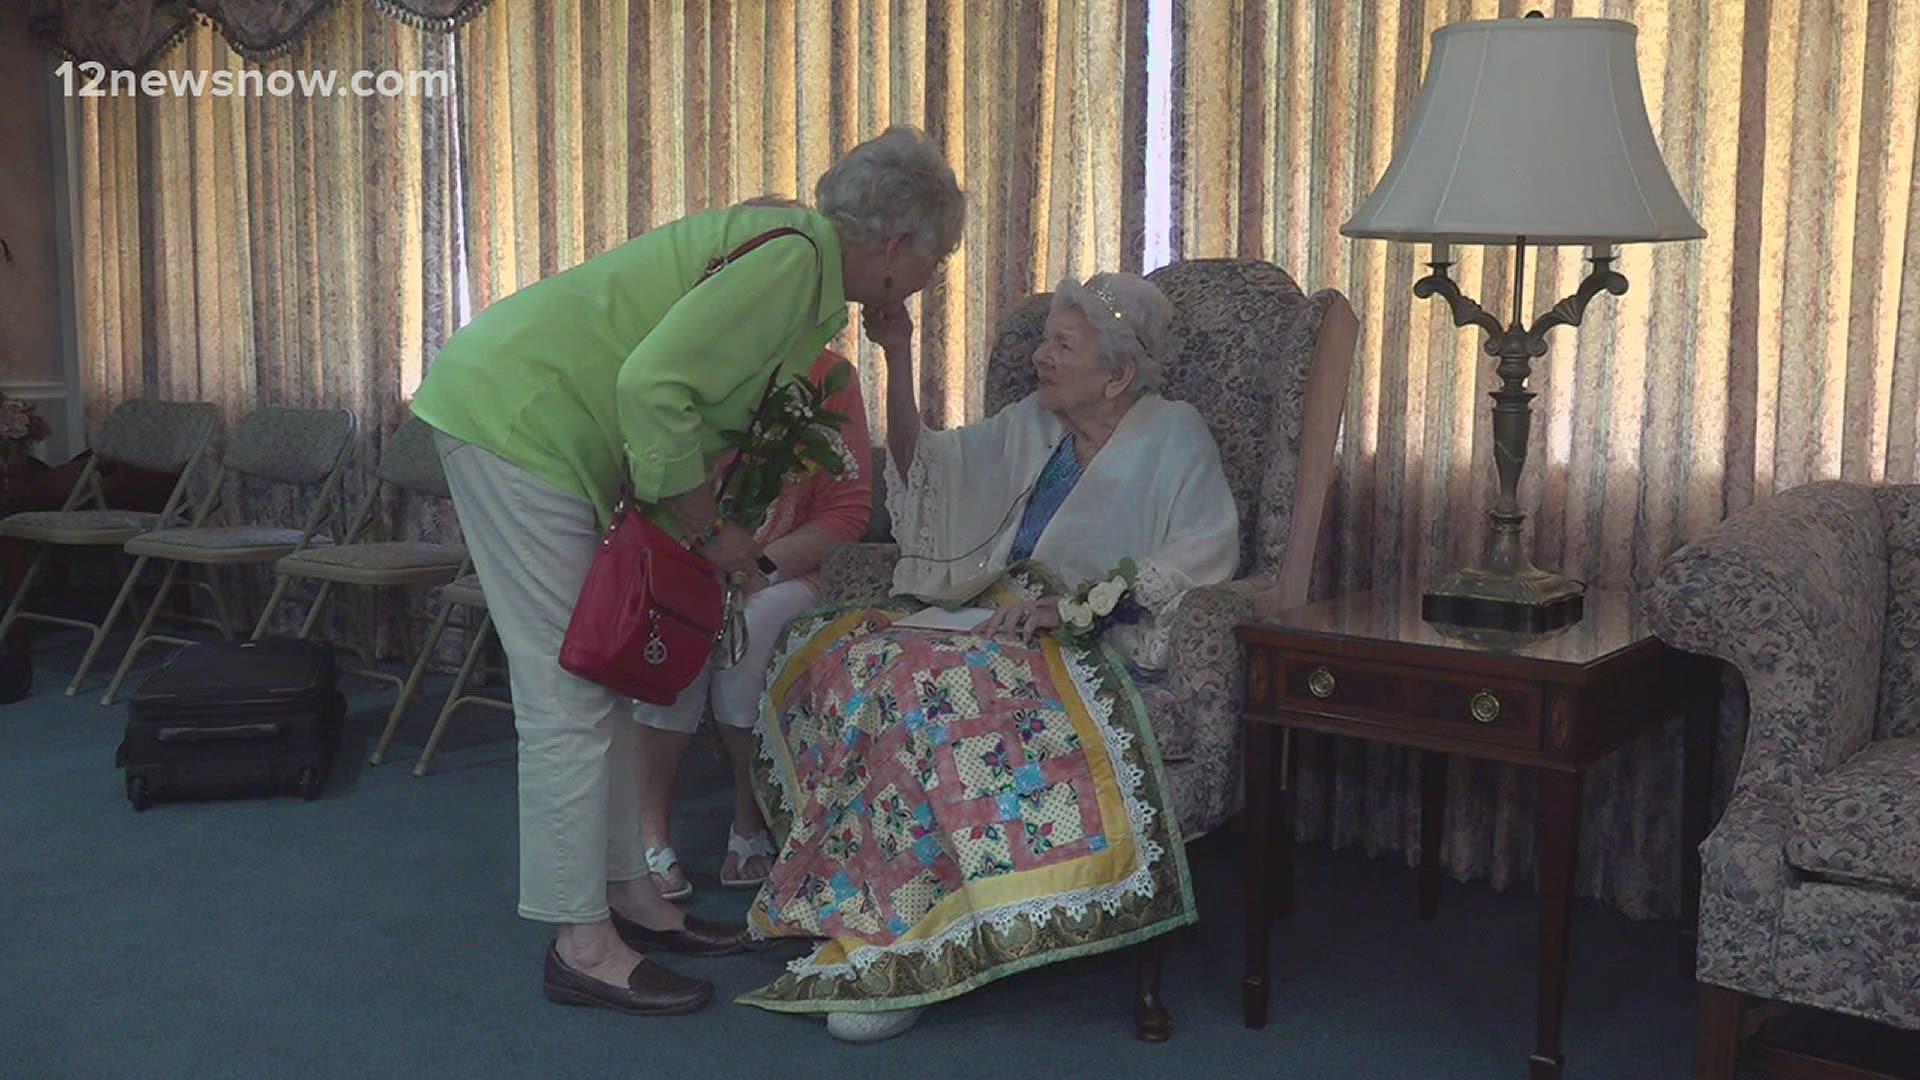 Sue Kent turned 100 and her family and friends gathered to make sure she felt like a queen for a day.